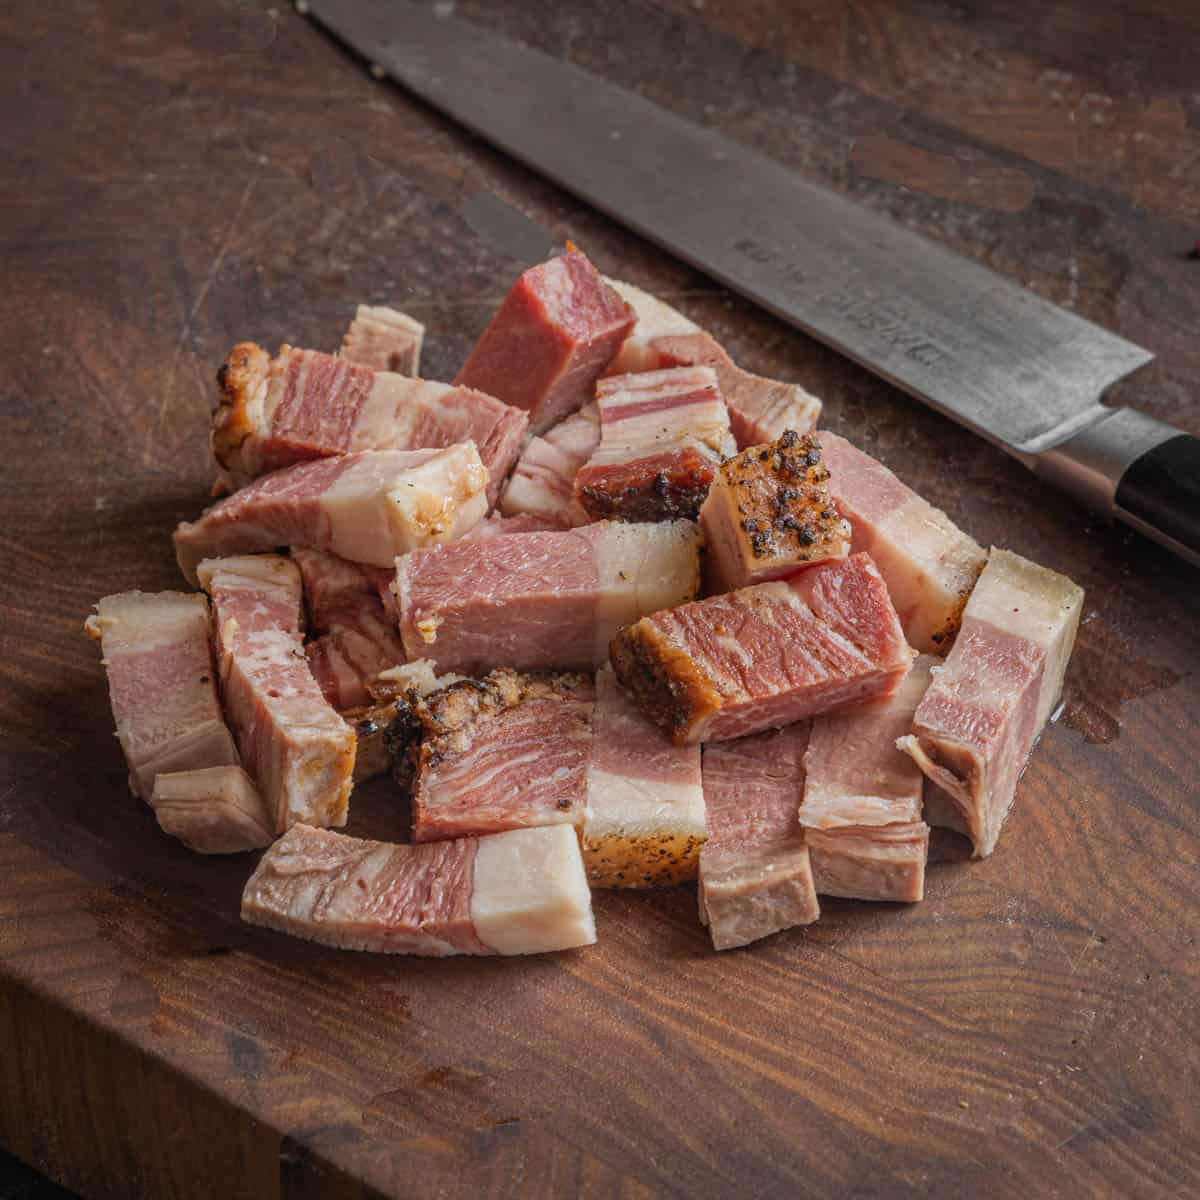 Thick sliced lardons or batons of beef bacon next to a knife on a cutting board.